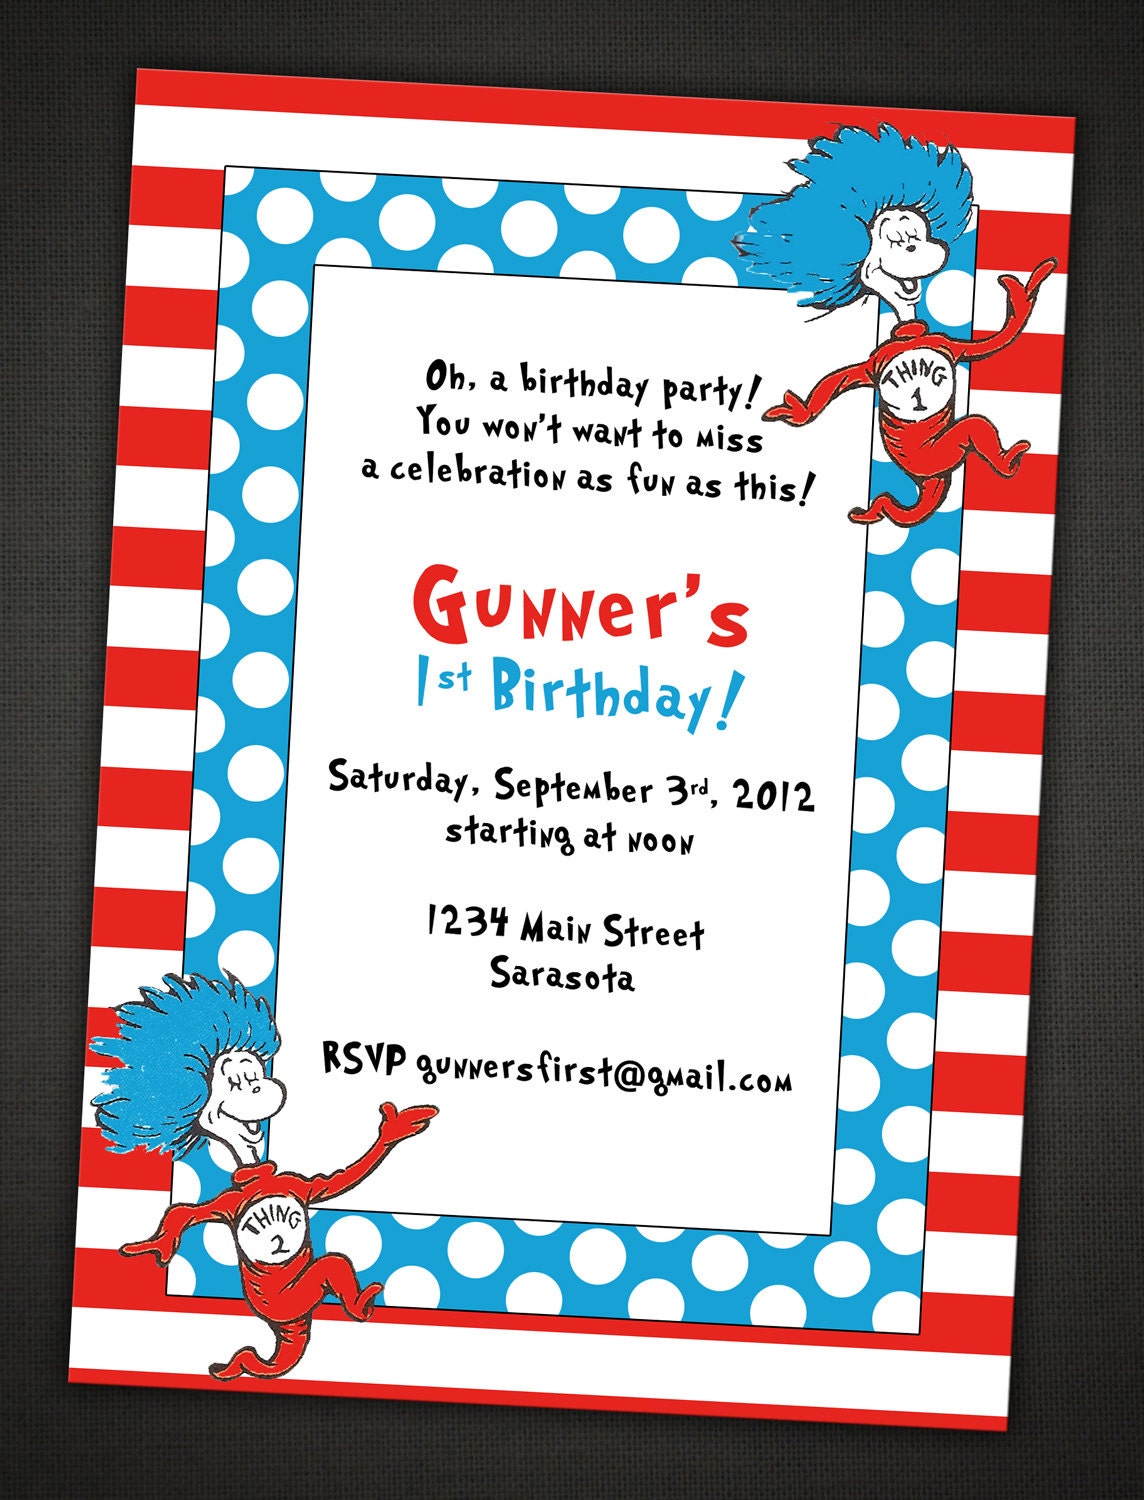 Dr. Seuss Party Invitation with Thing One and Thing by IDesignThat